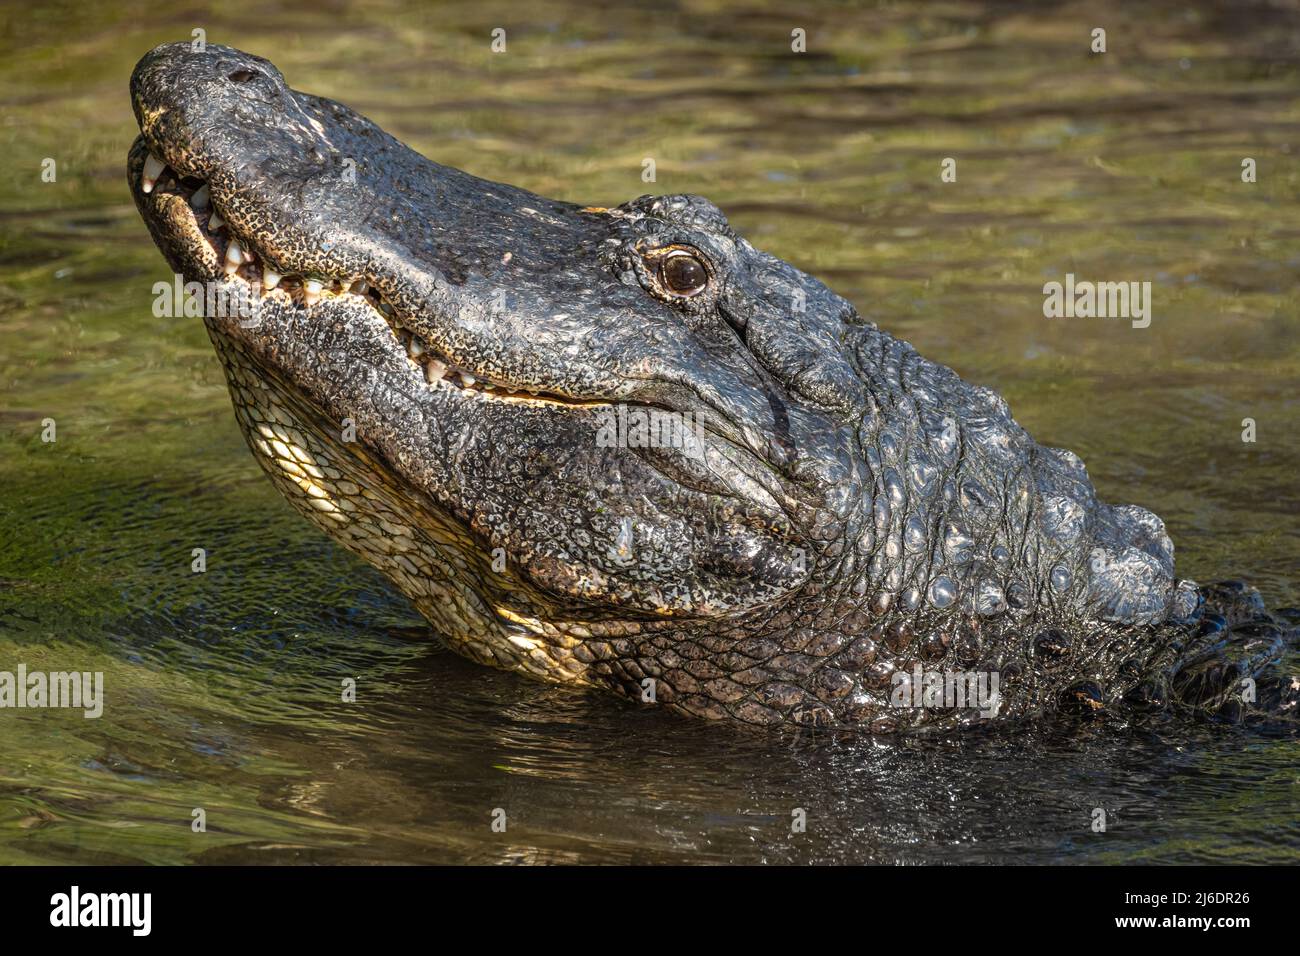 American alligator (Alligator mississippiensis) raising its head while bellowing at St. Augustine Alligator Farm Zoological Park in St. Augustine, FL. Stock Photo